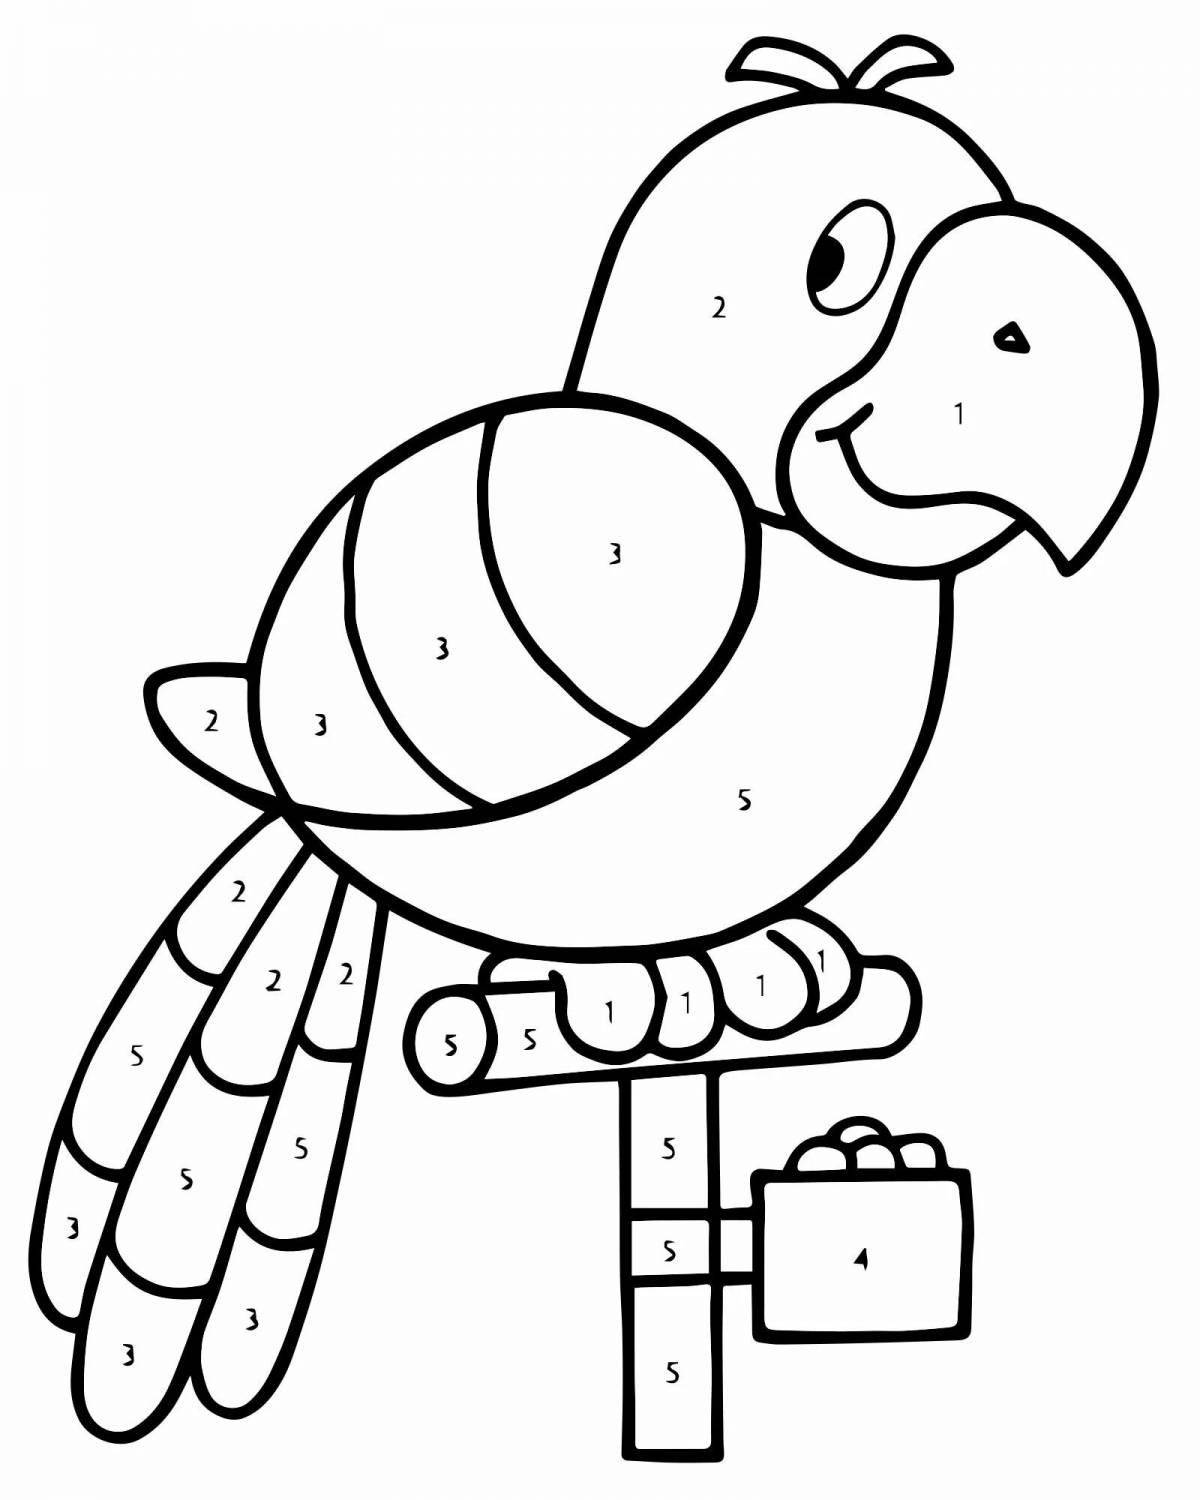 Playful little numbers coloring page